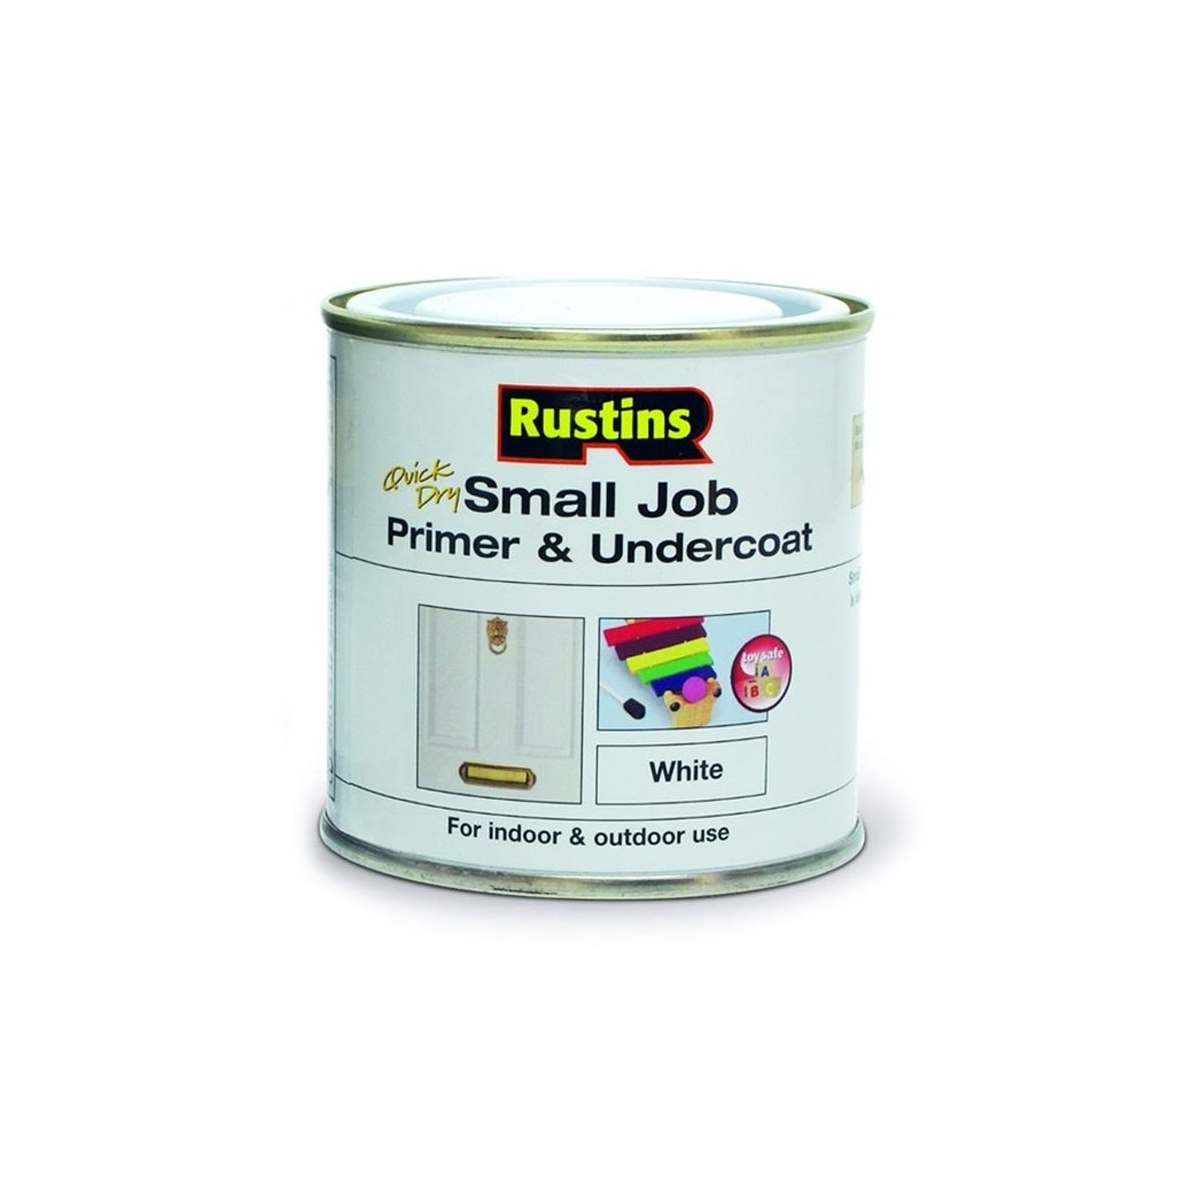 Rustins Quick Dry Small Job Primer and Undercoat White 250ml